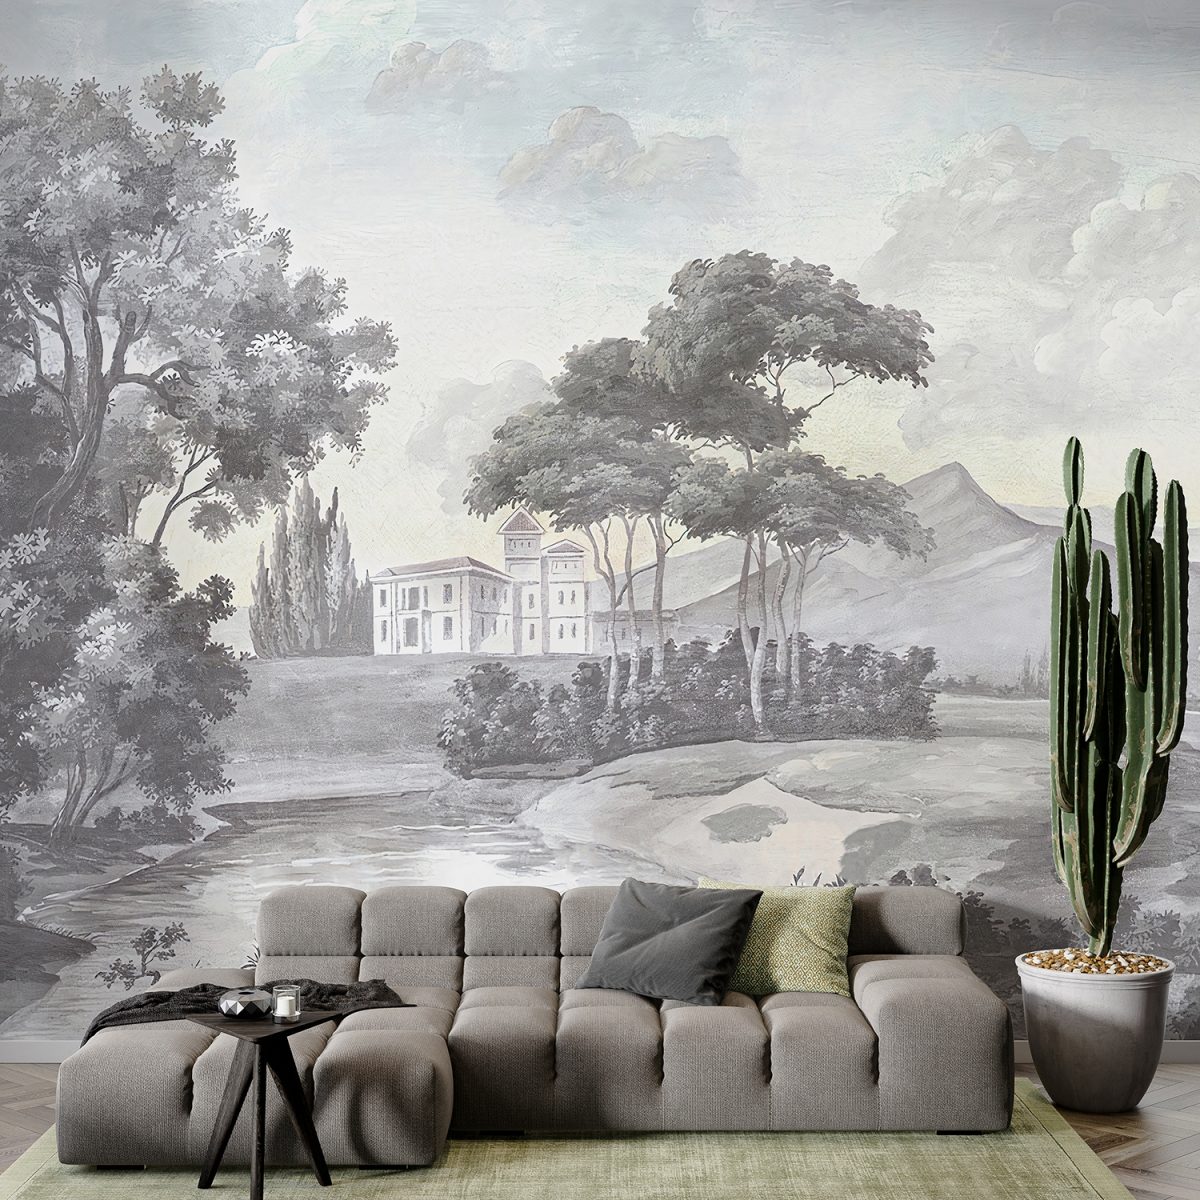 Gray Color Sketched Town Wallpaper Mural